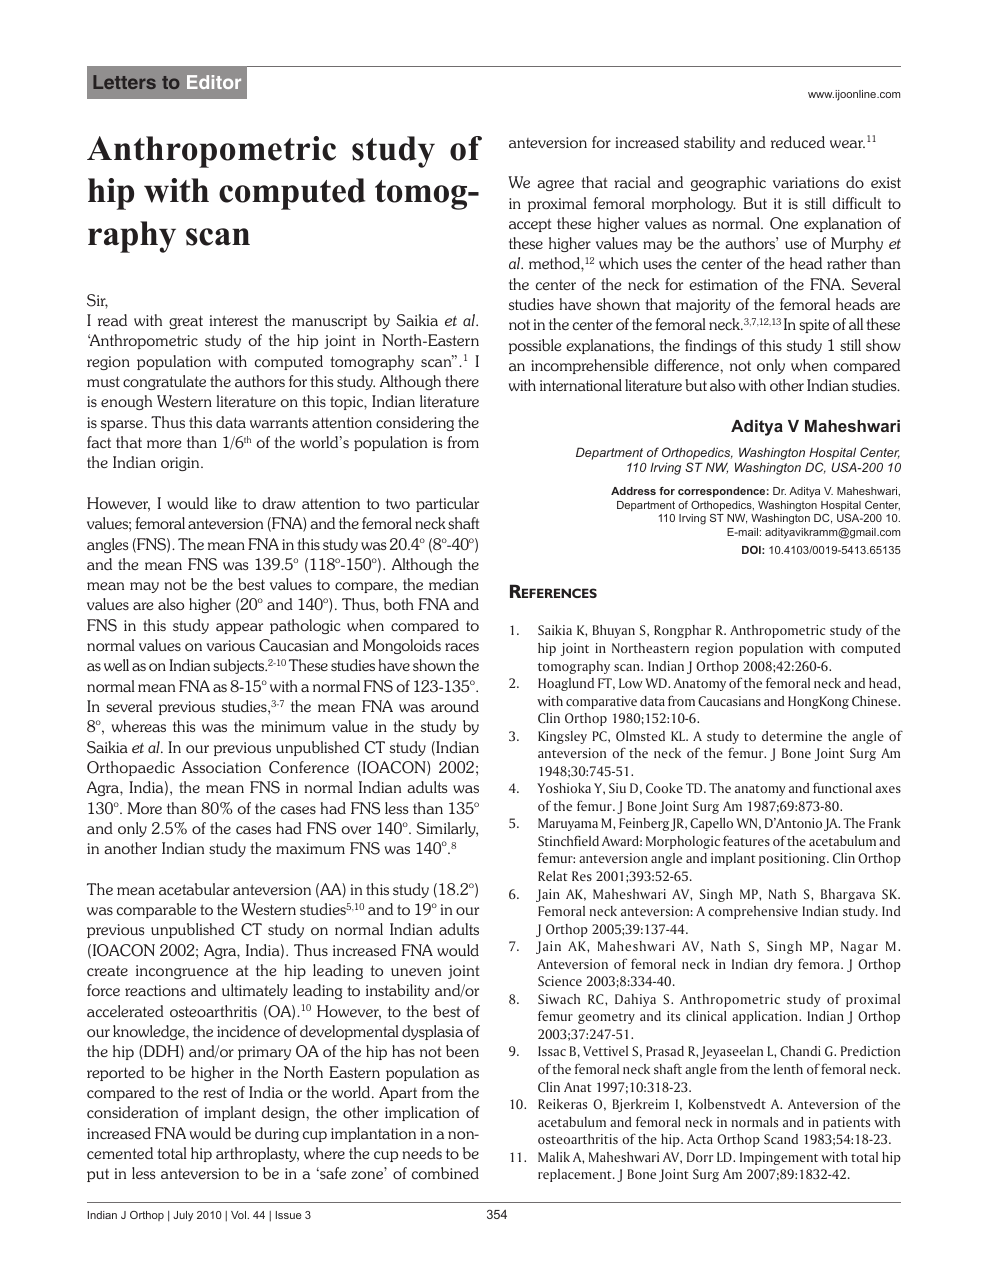 Anthropometric Study Of Hip With Computed Tomography Scan Topic Of Research Paper In Veterinary Science Download Scholarly Article Pdf And Read For Free On Cyberleninka Open Science Hub Ijoonline.com is tracked by us since september, 2015. hip with computed tomography scan